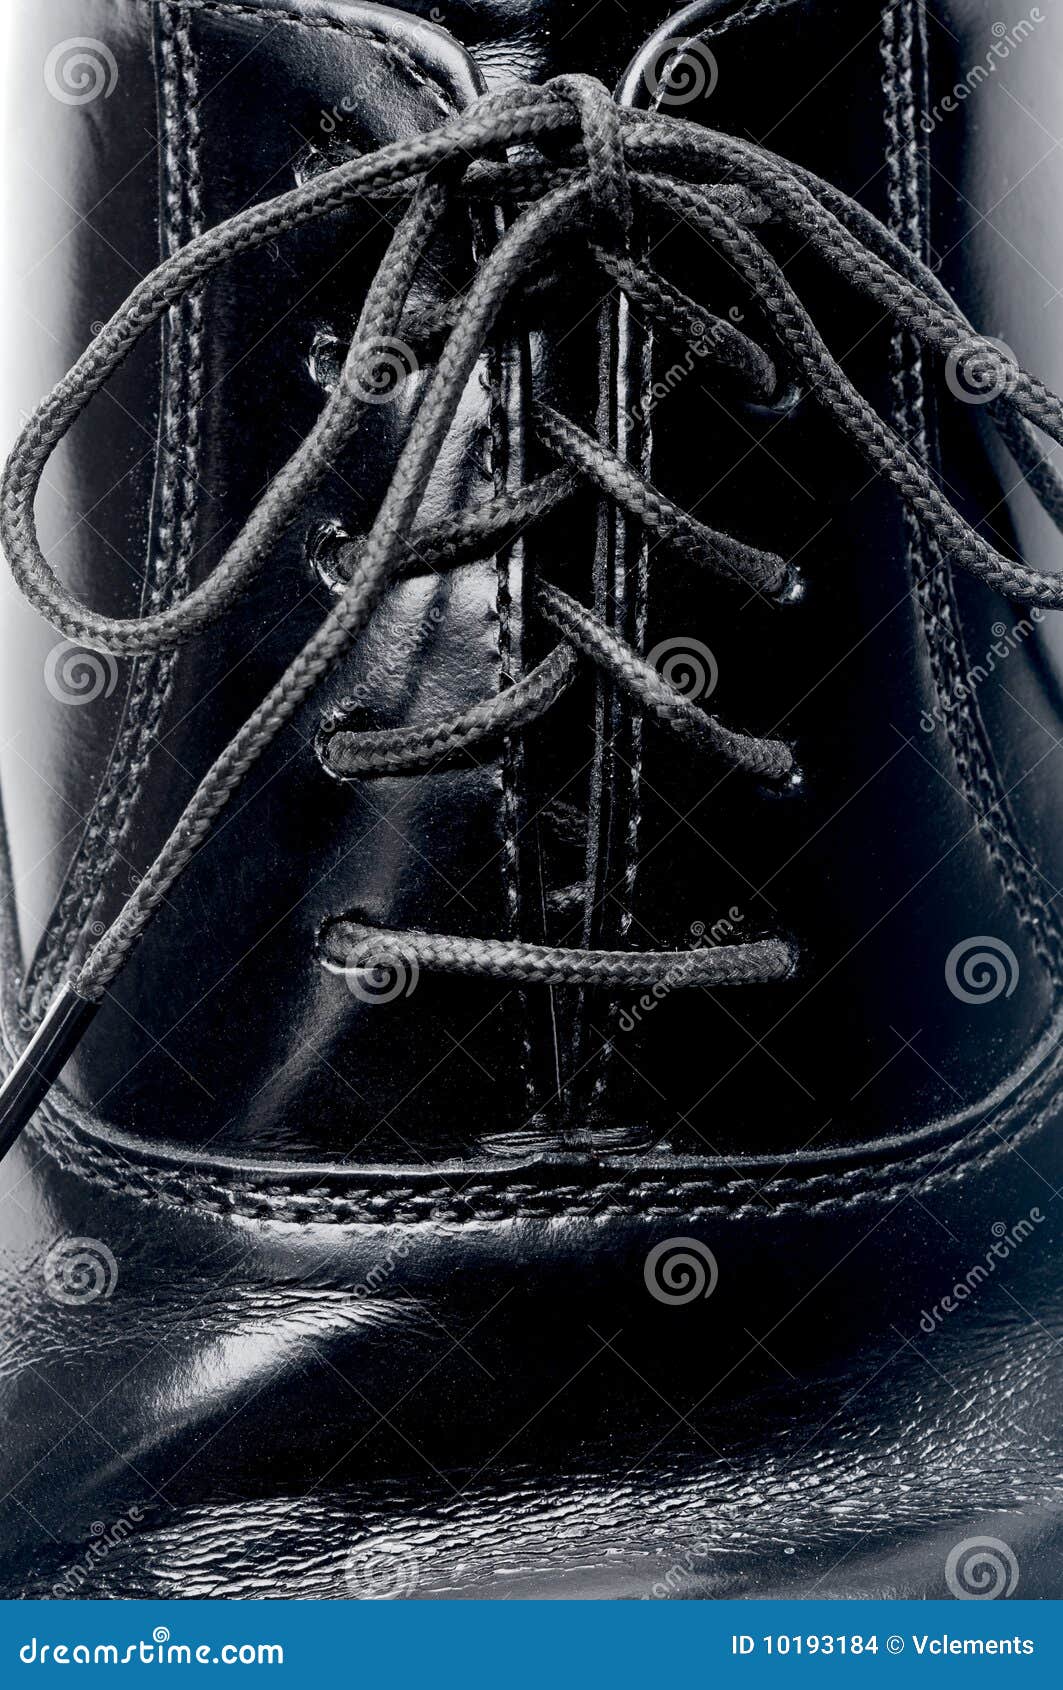 Laces on a Black Leather Shoe Stock Photo - Image of shoe, fall: 10193184